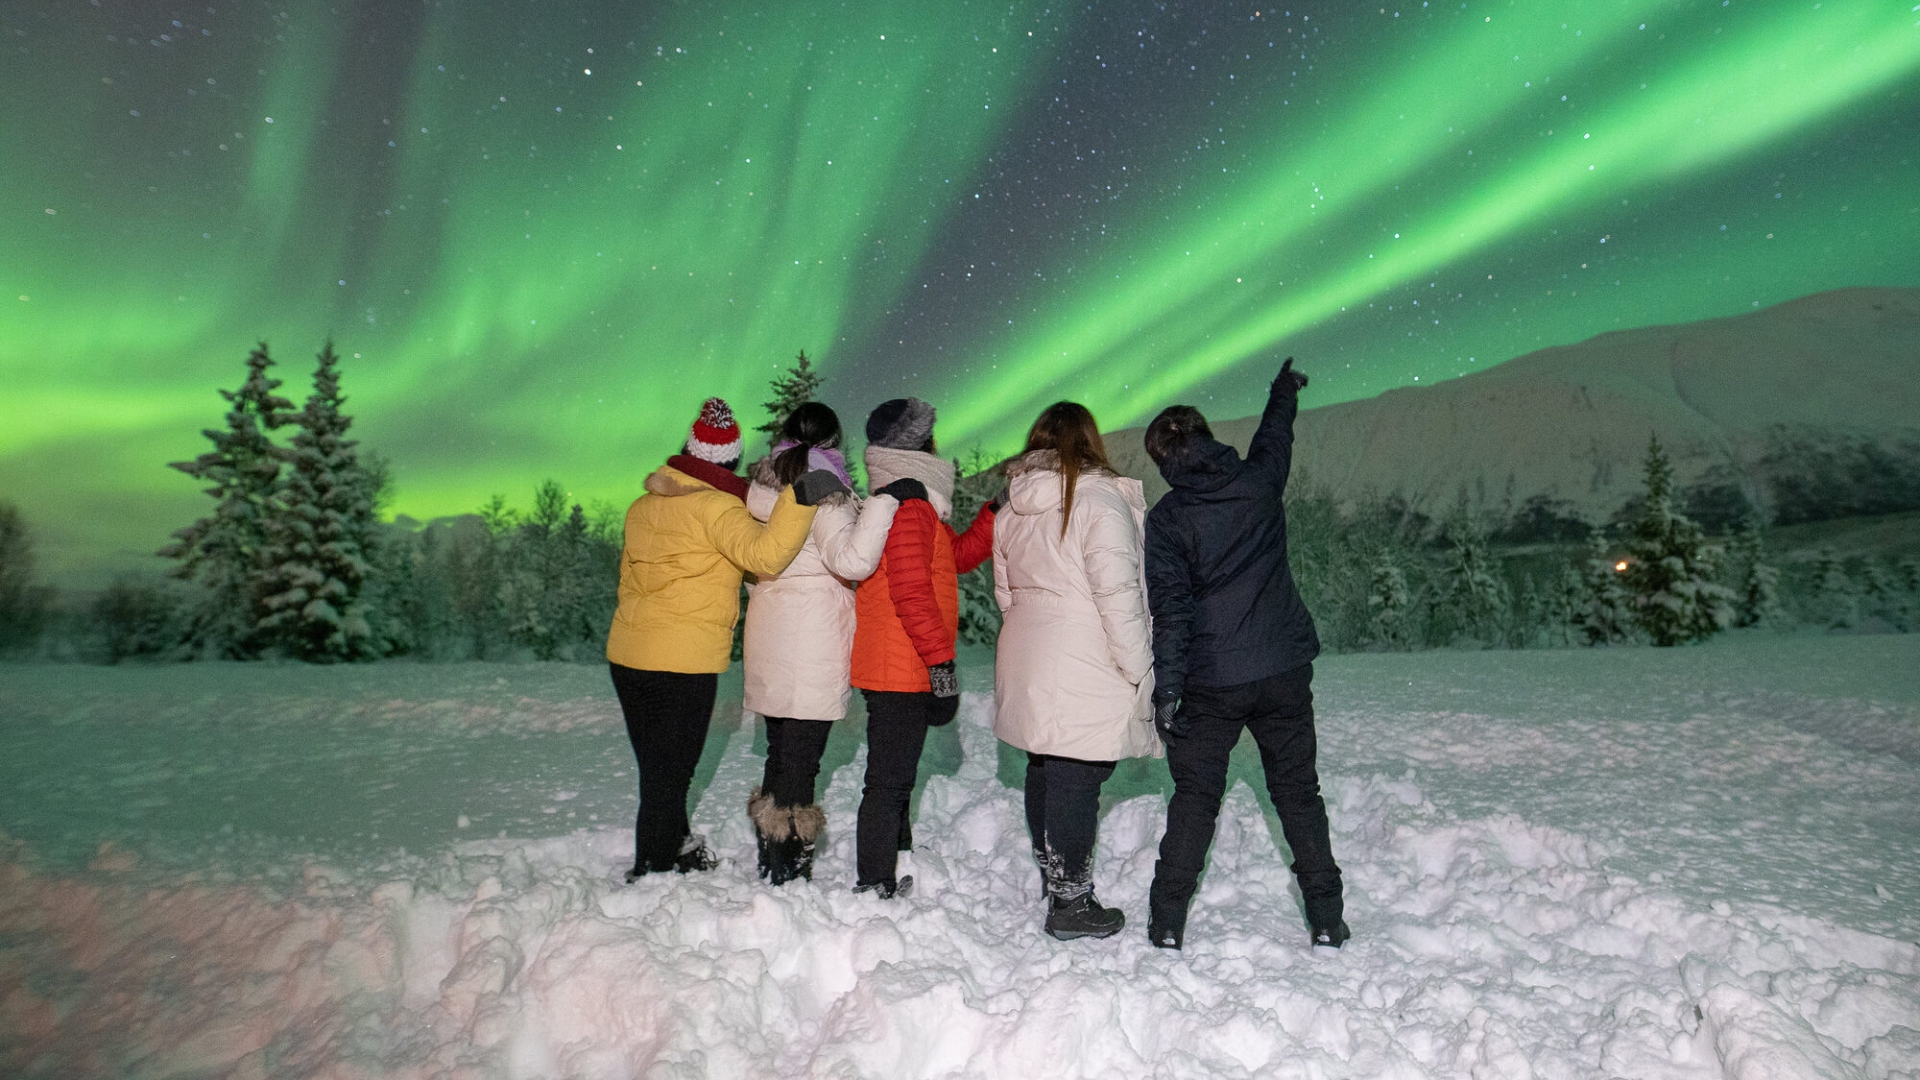 People looking at the northern lights during winter